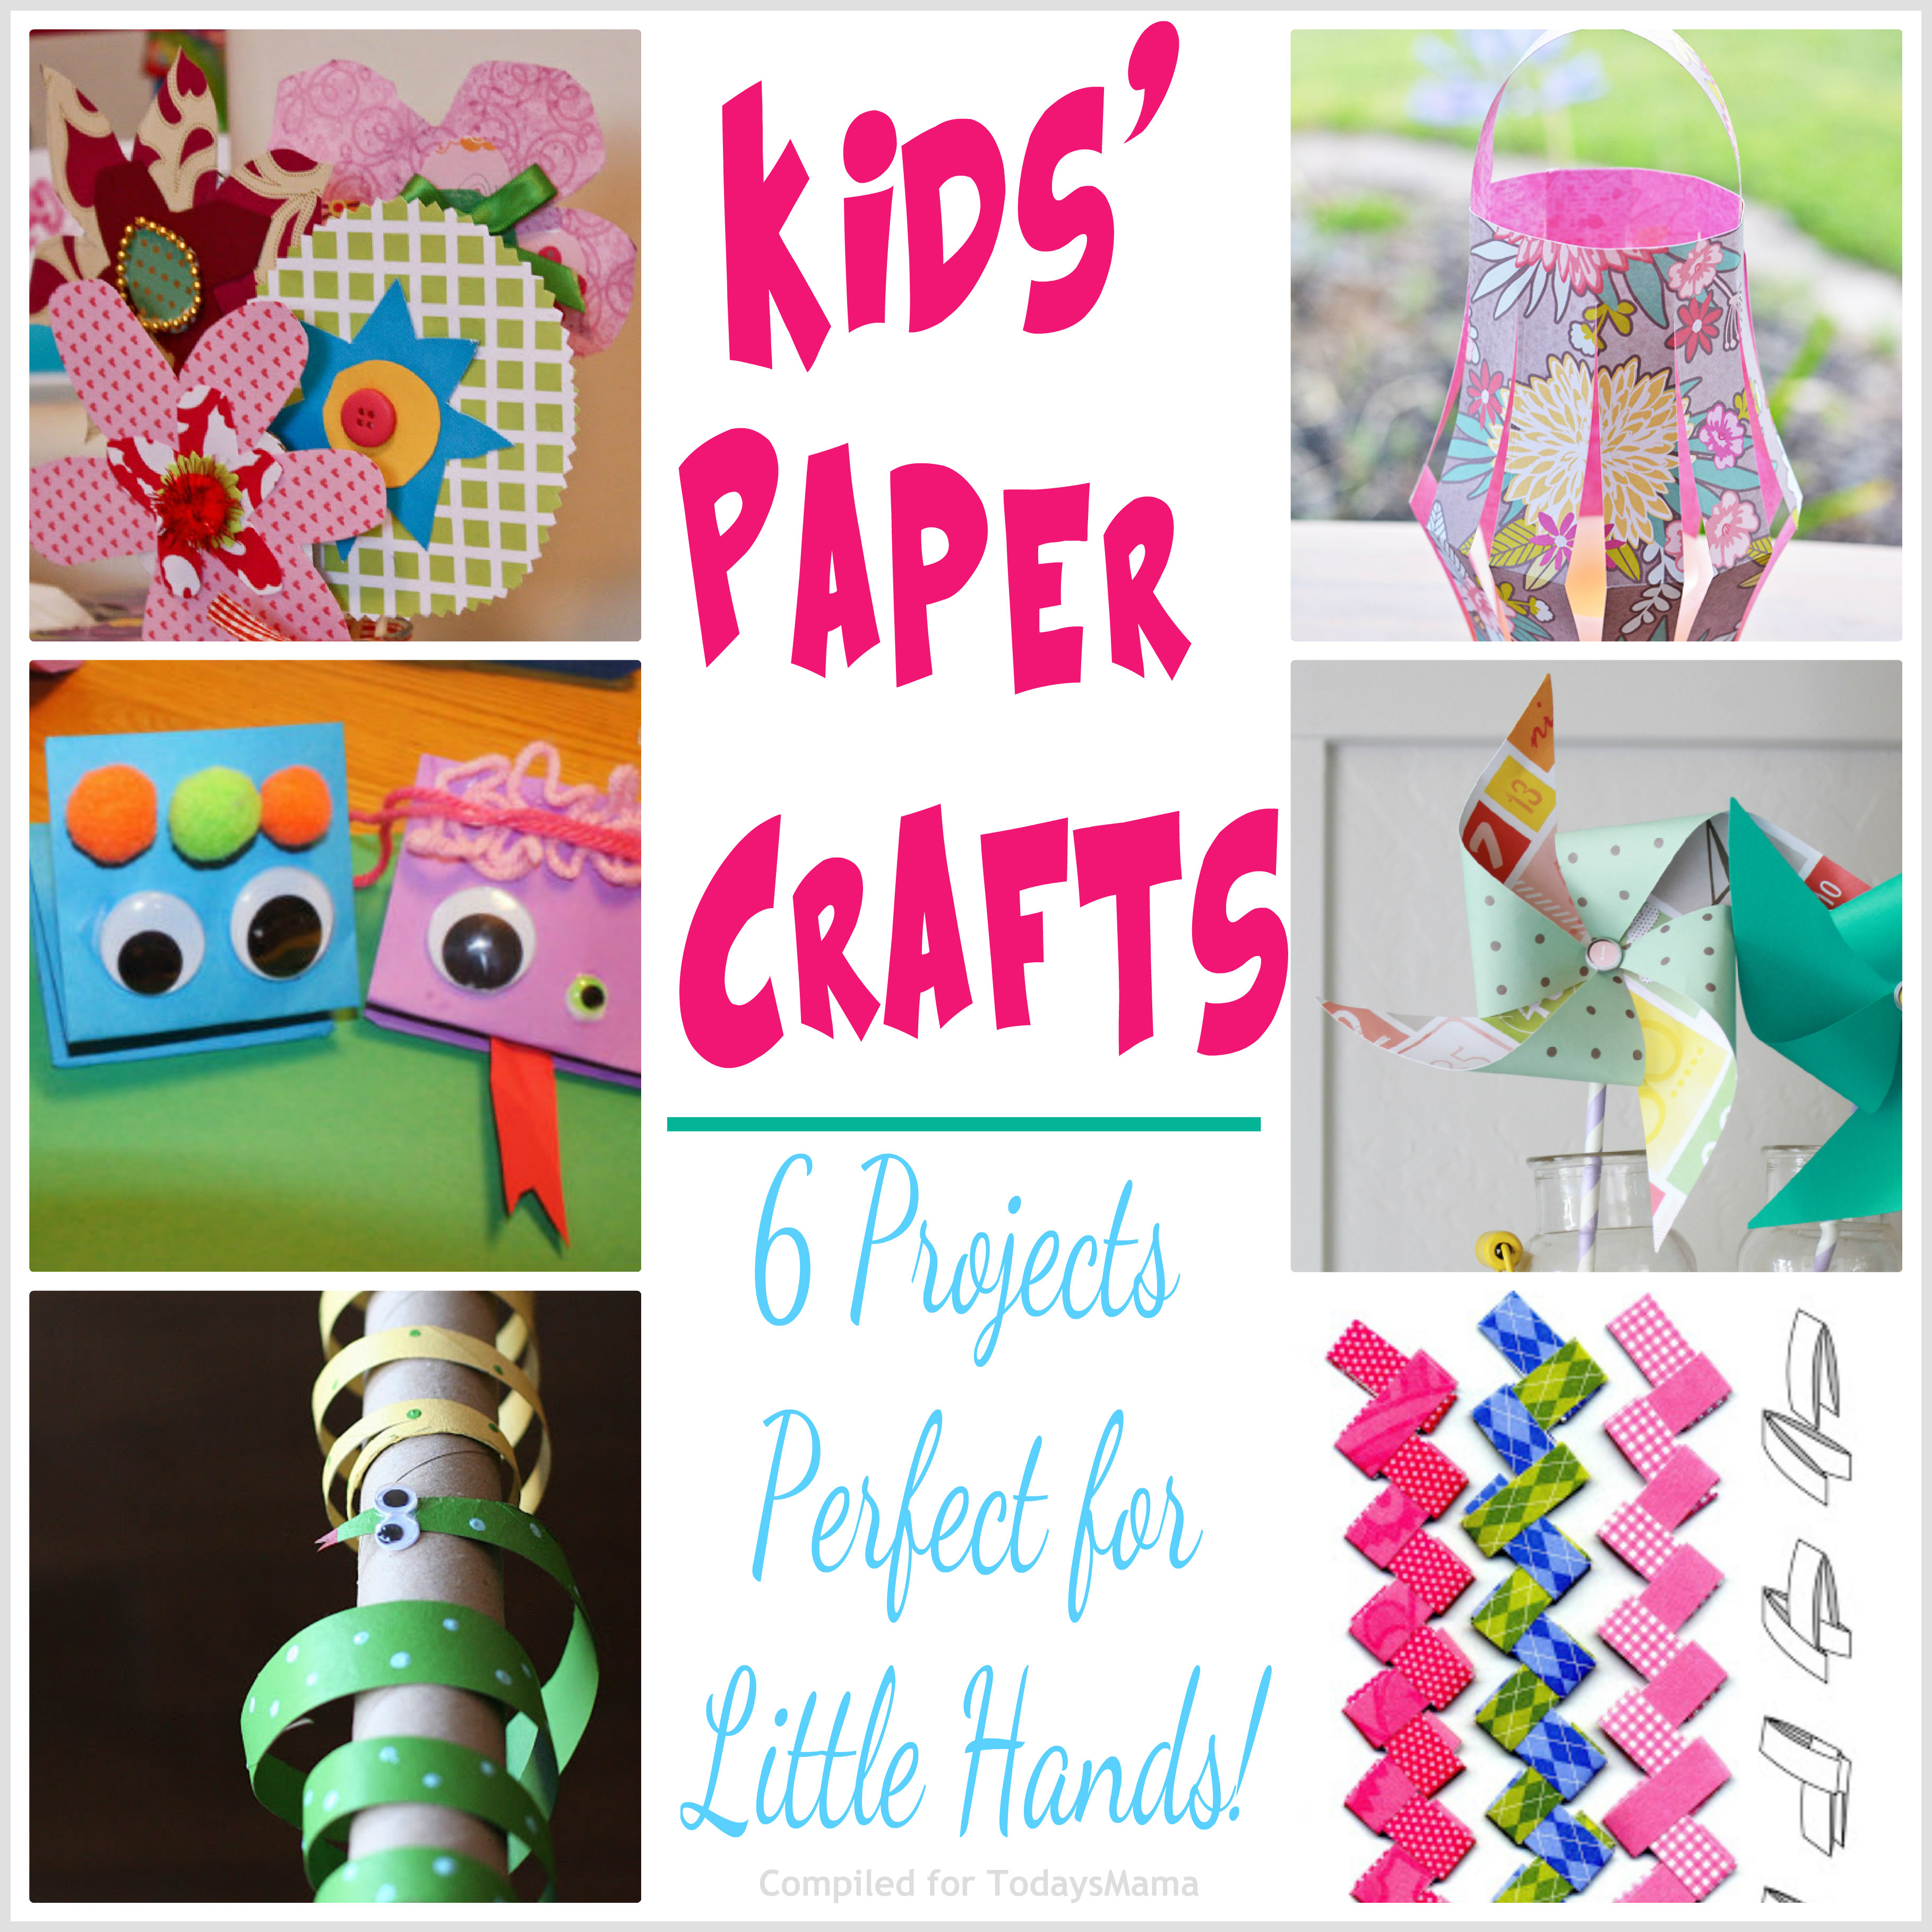 TodaysMamacom   Kids Paper Crafts  Projects Perfect for Little Hands